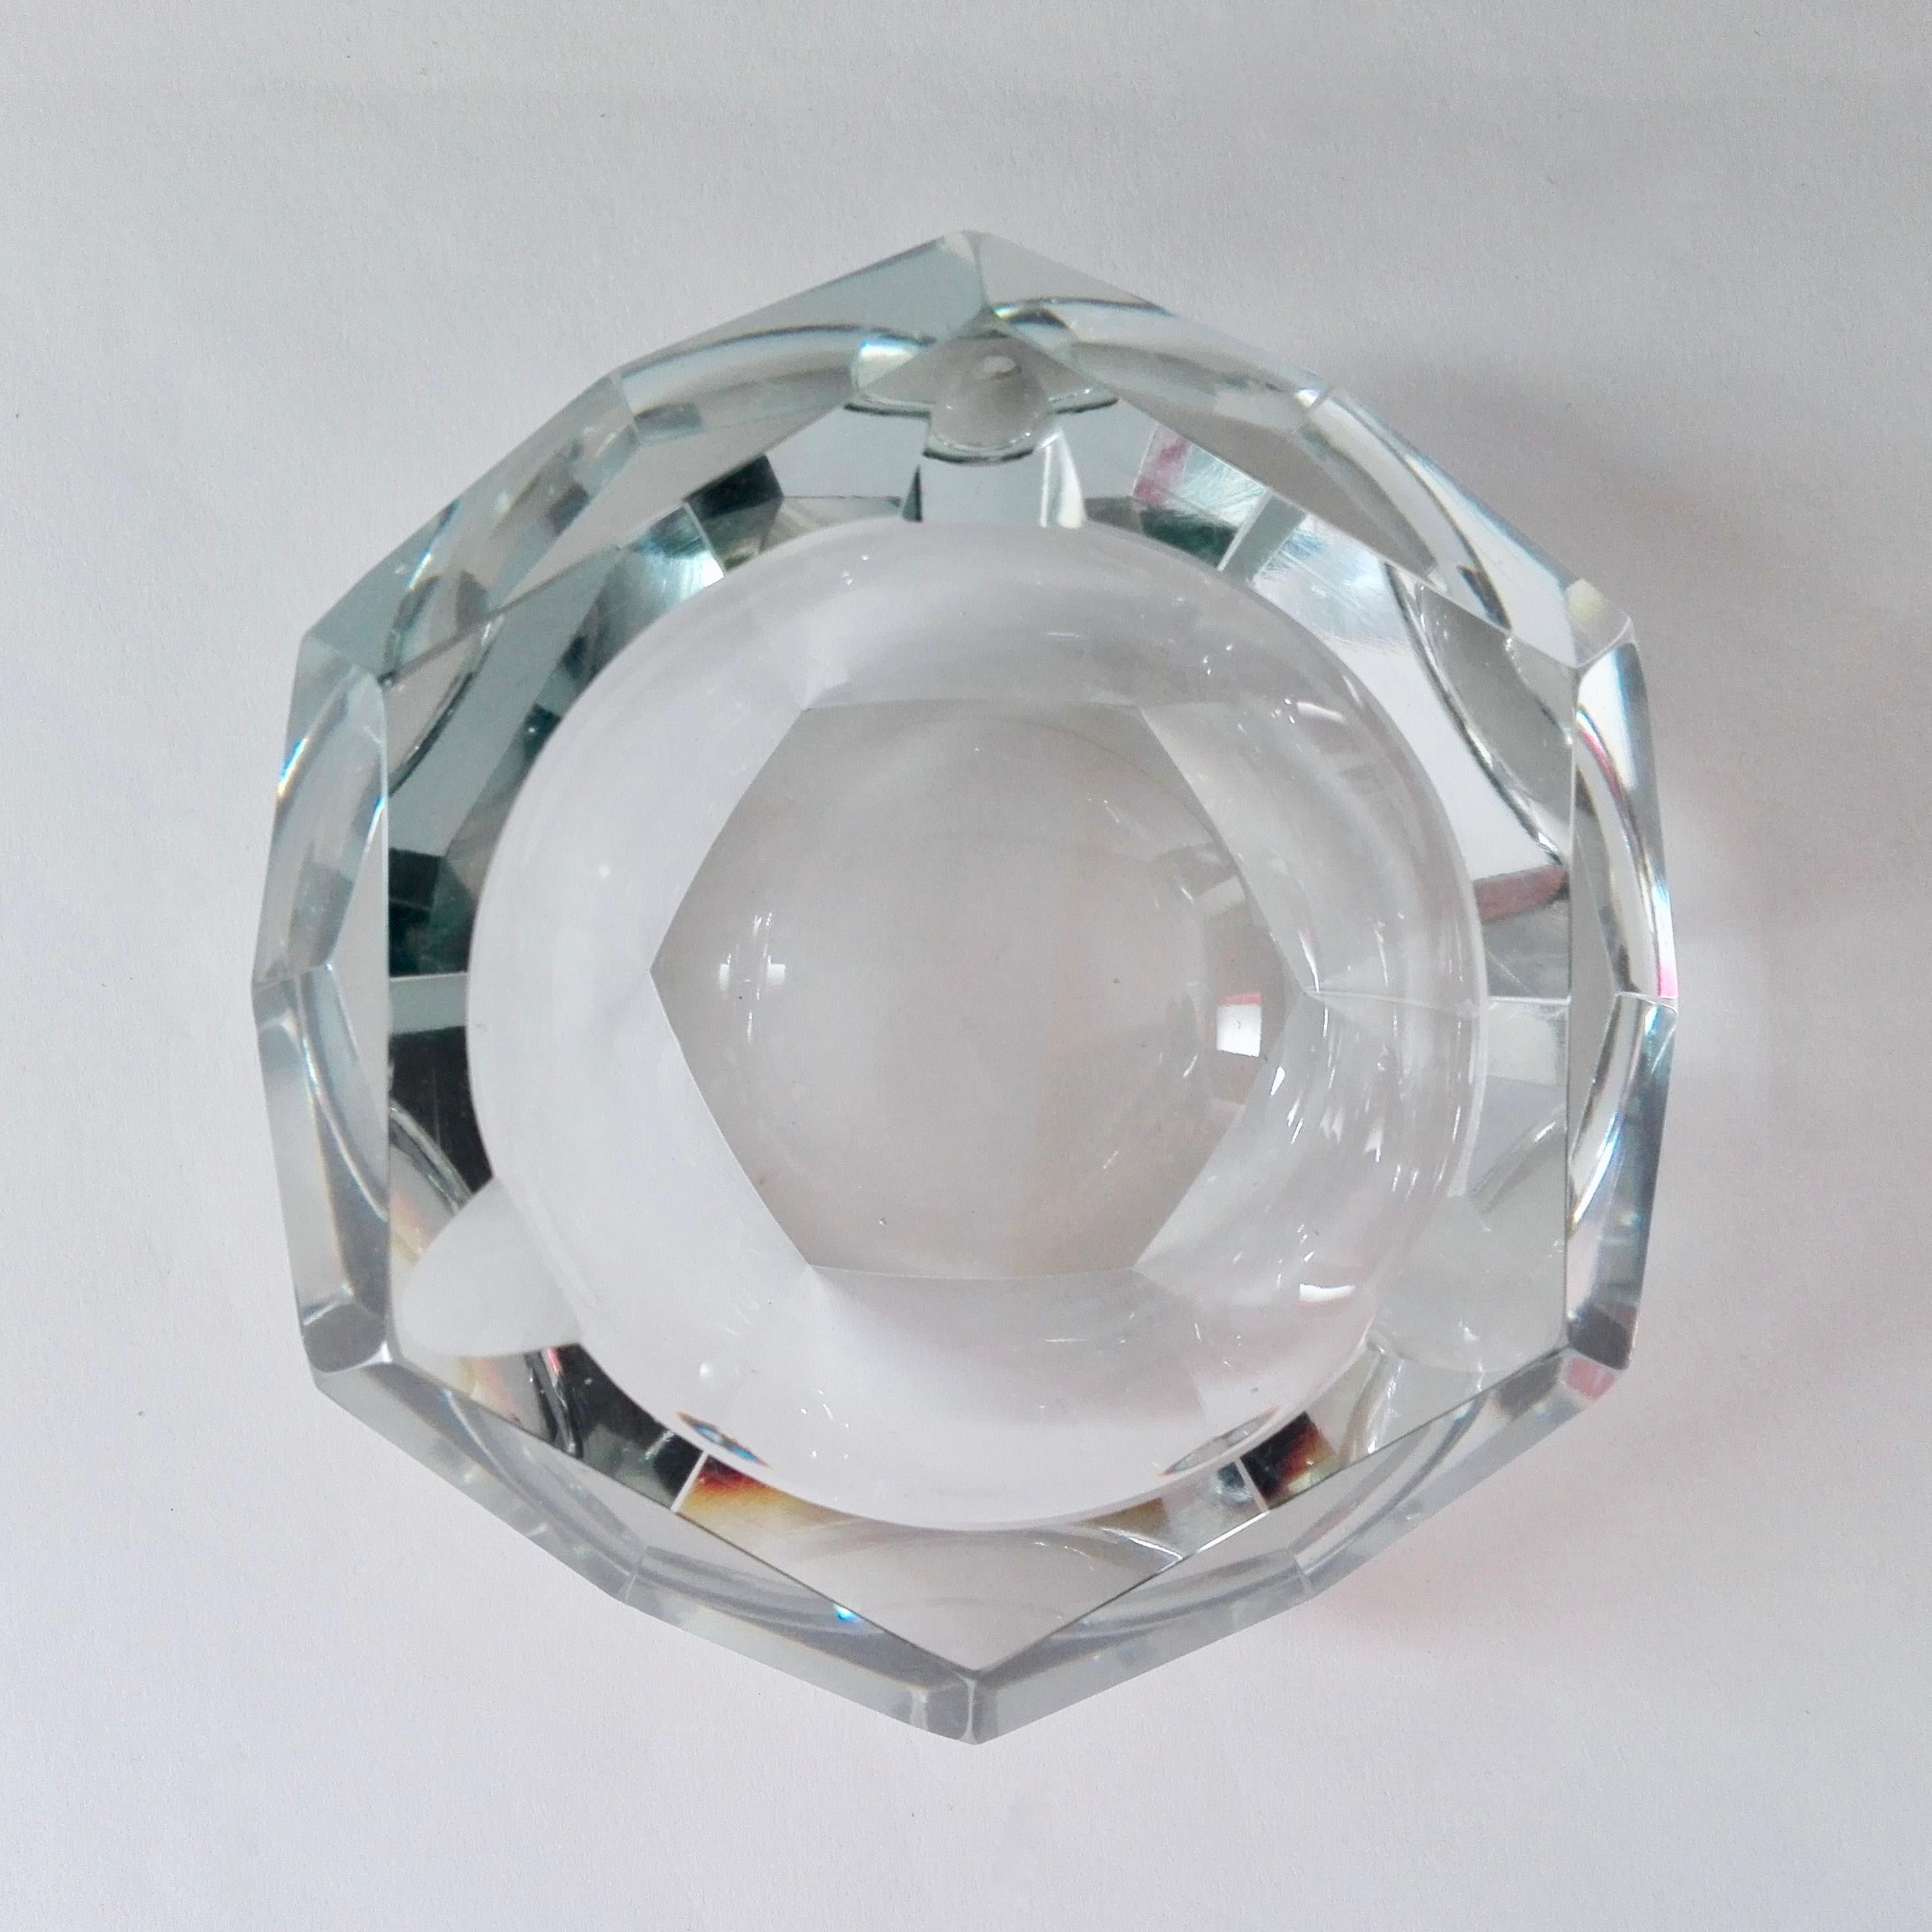 Italian 1960s vintage hexagonal ashtray/pocket emptier in faceted cut crystal.